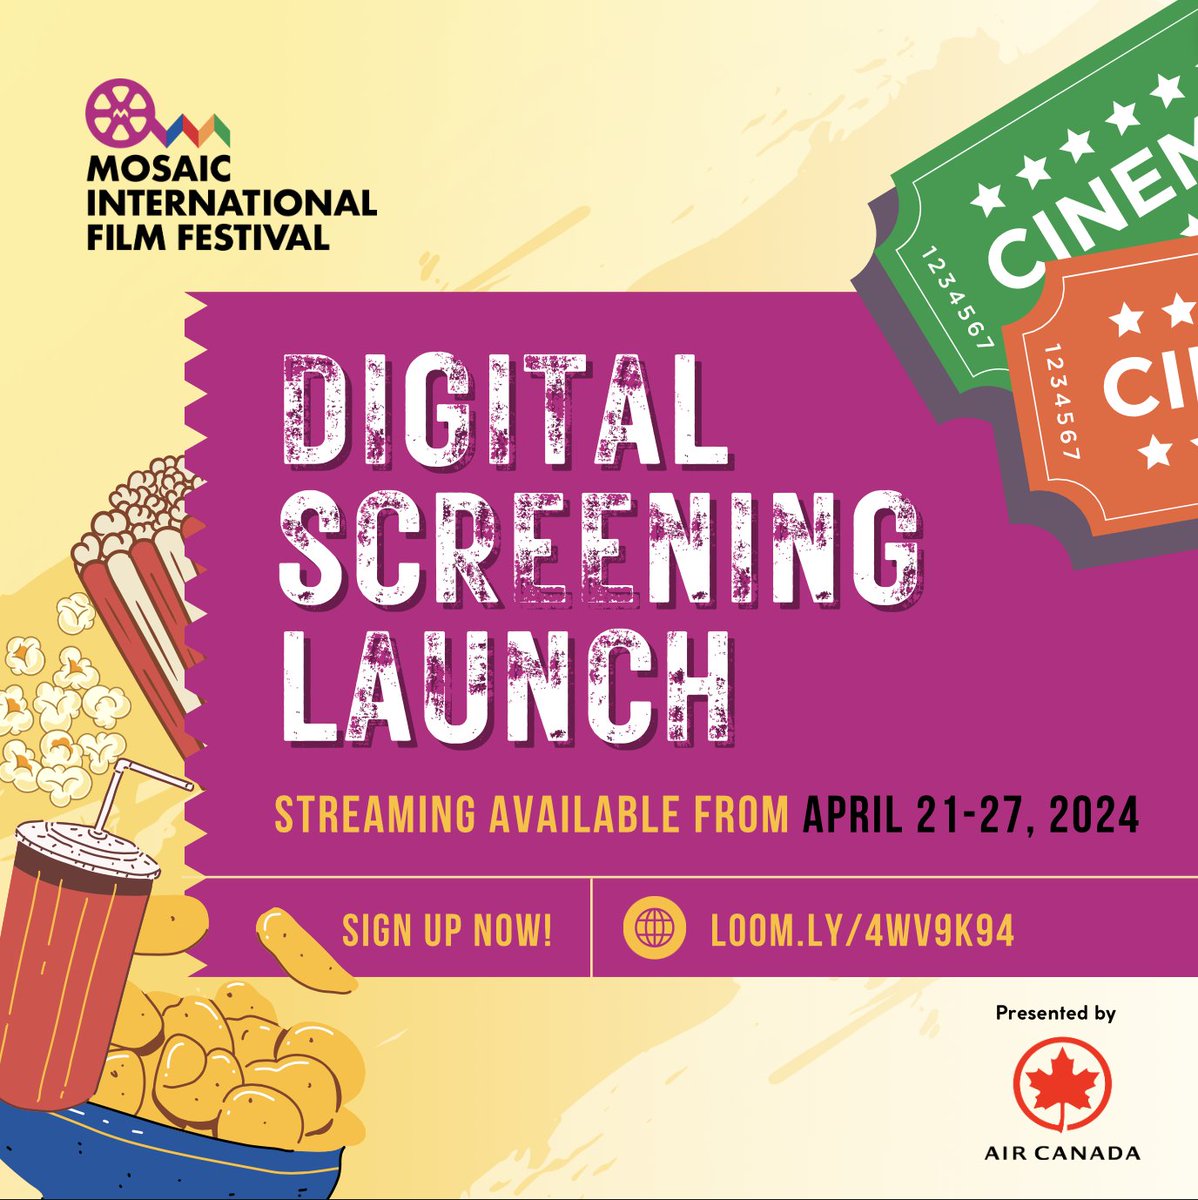 The Digital Screening Launch of the 5th Mosaic Film Festival, presented by @aircanada, is here! Dive into a cinematic journey with all submissions available to stream from Apr 21-27. Let the movie magic begin! 🍿✨ Sign up now: loom.ly/4wv9k94 #MosaicFilmFest2024